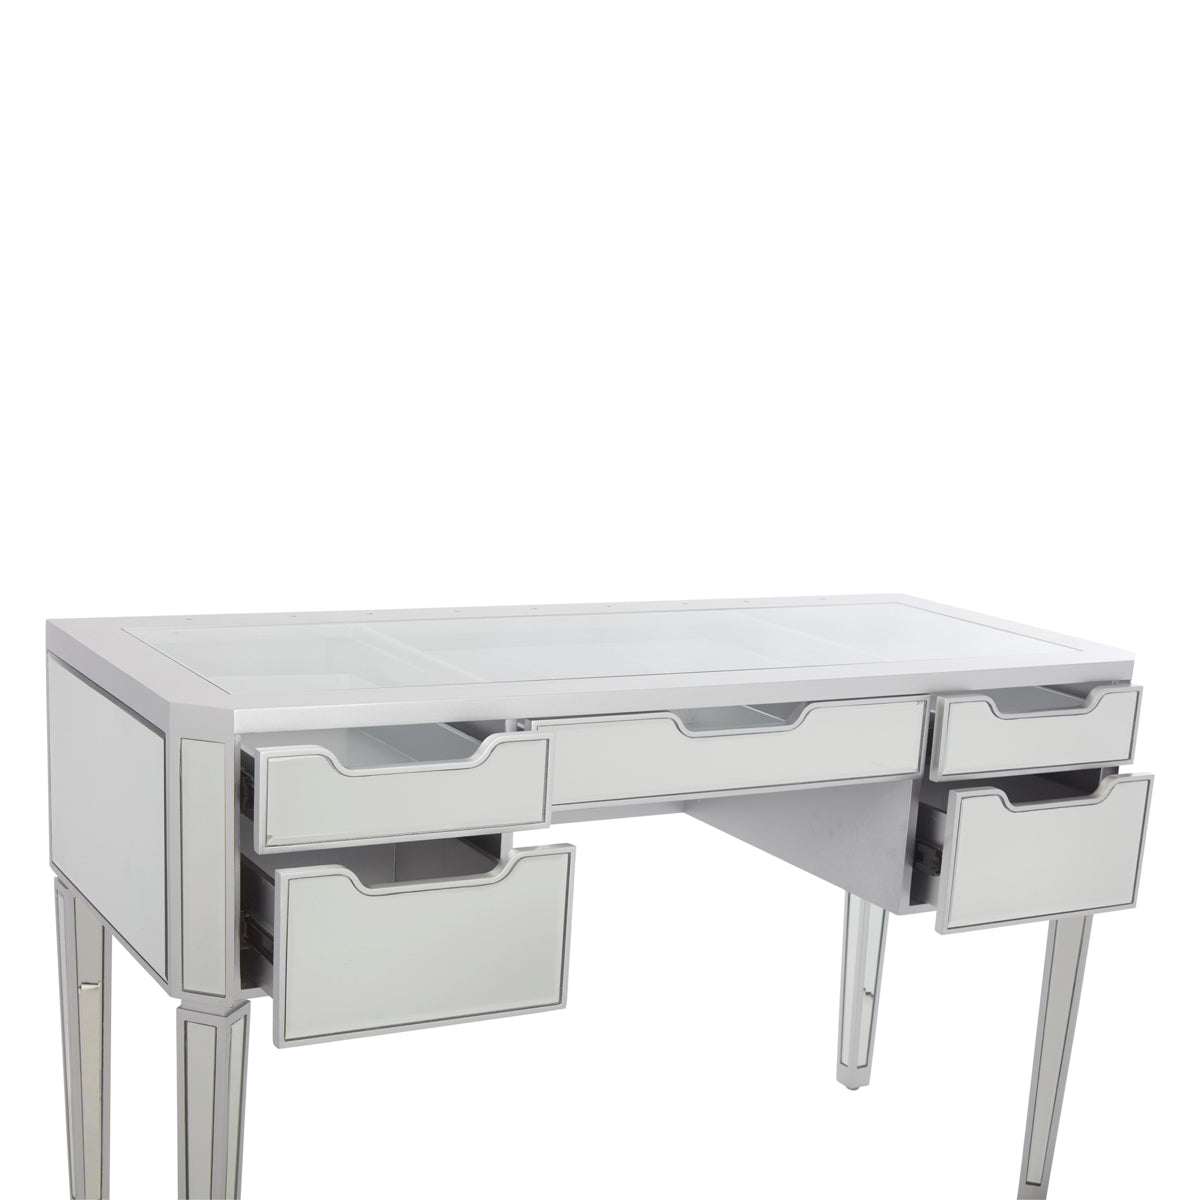 Hello Kitty SlayStation Vanity Table in Silver | 21.75 x 51.25 in | Impressions Vanity Co. | Aluminum/Glass